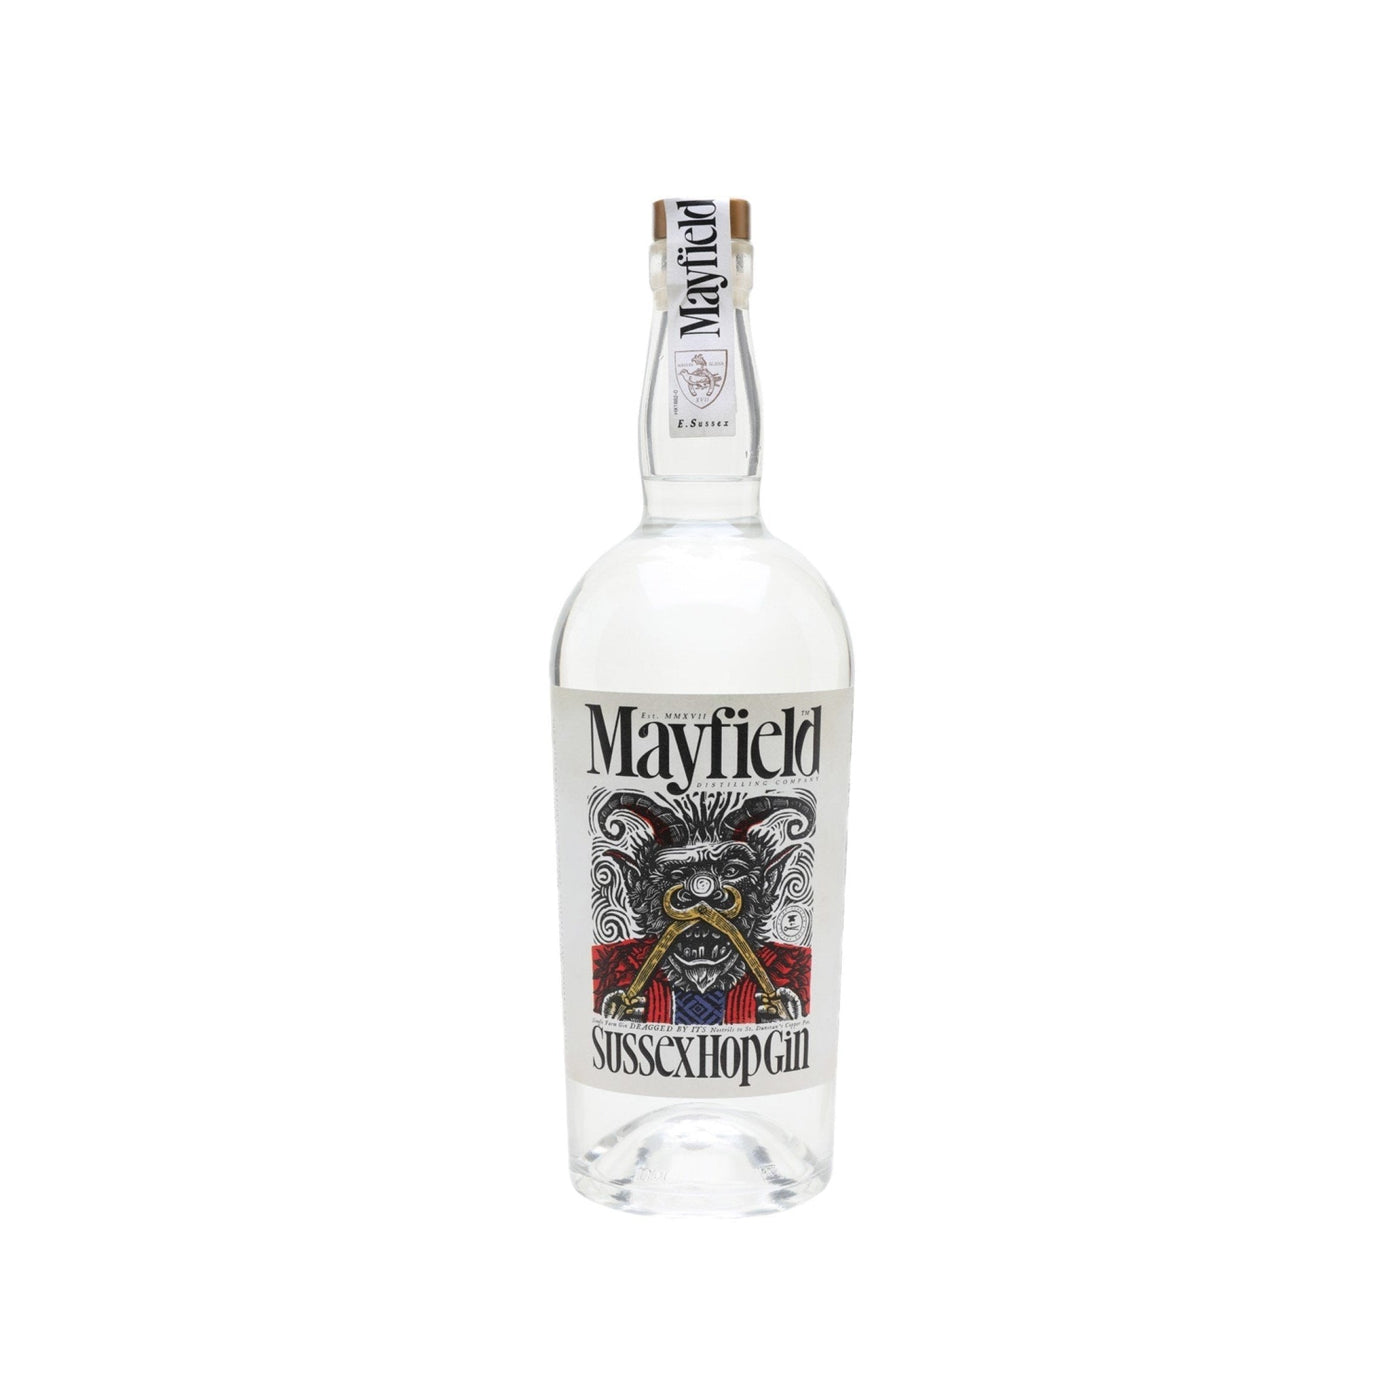 Mayfield Sussex Hop Gin 40% 70cl